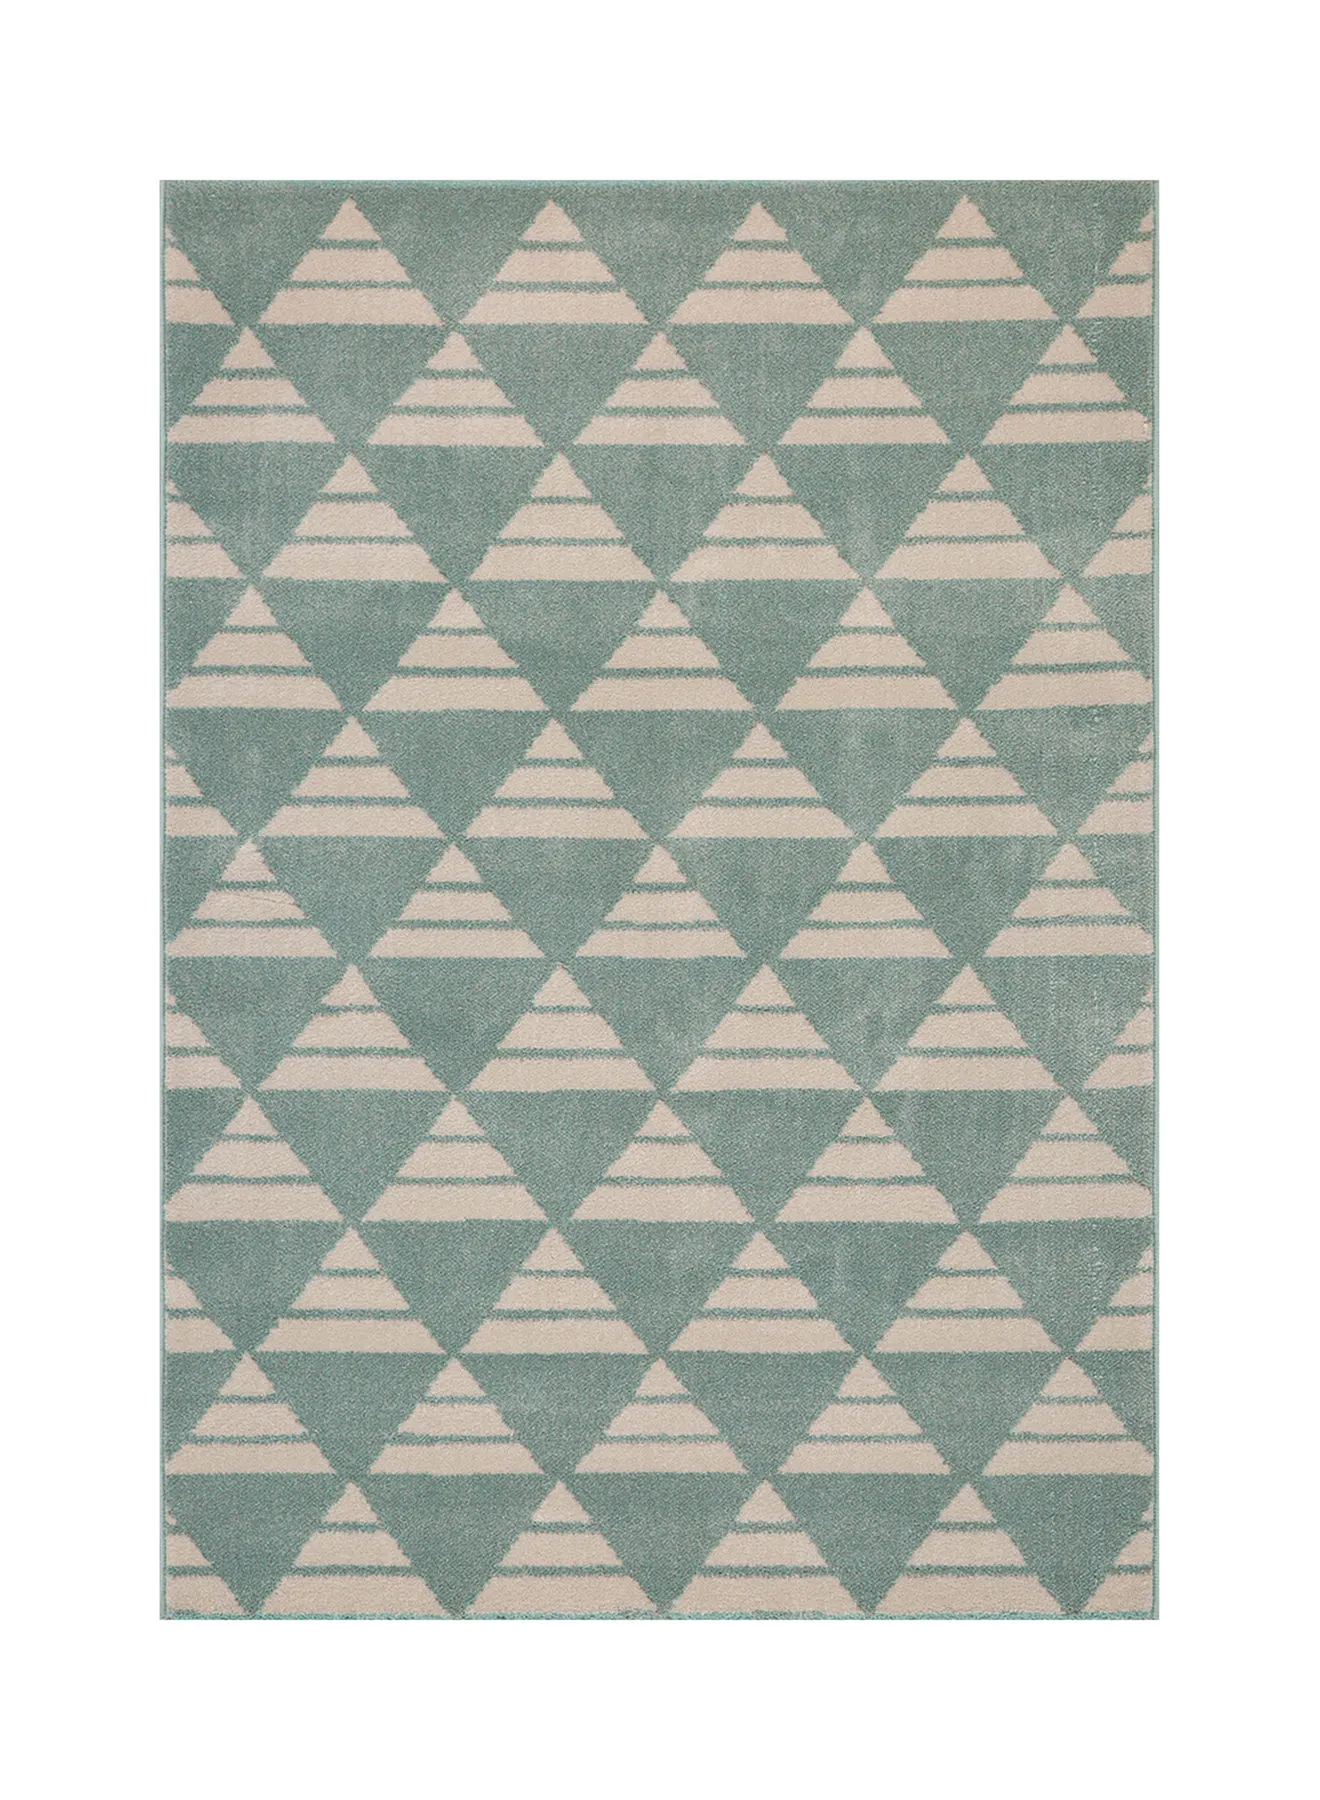 Switch Sanford Unique Luxury Quality Material For The Perfect Stylish Home Soft And Comfort Level 1504L Light Blue 280 x 380cm